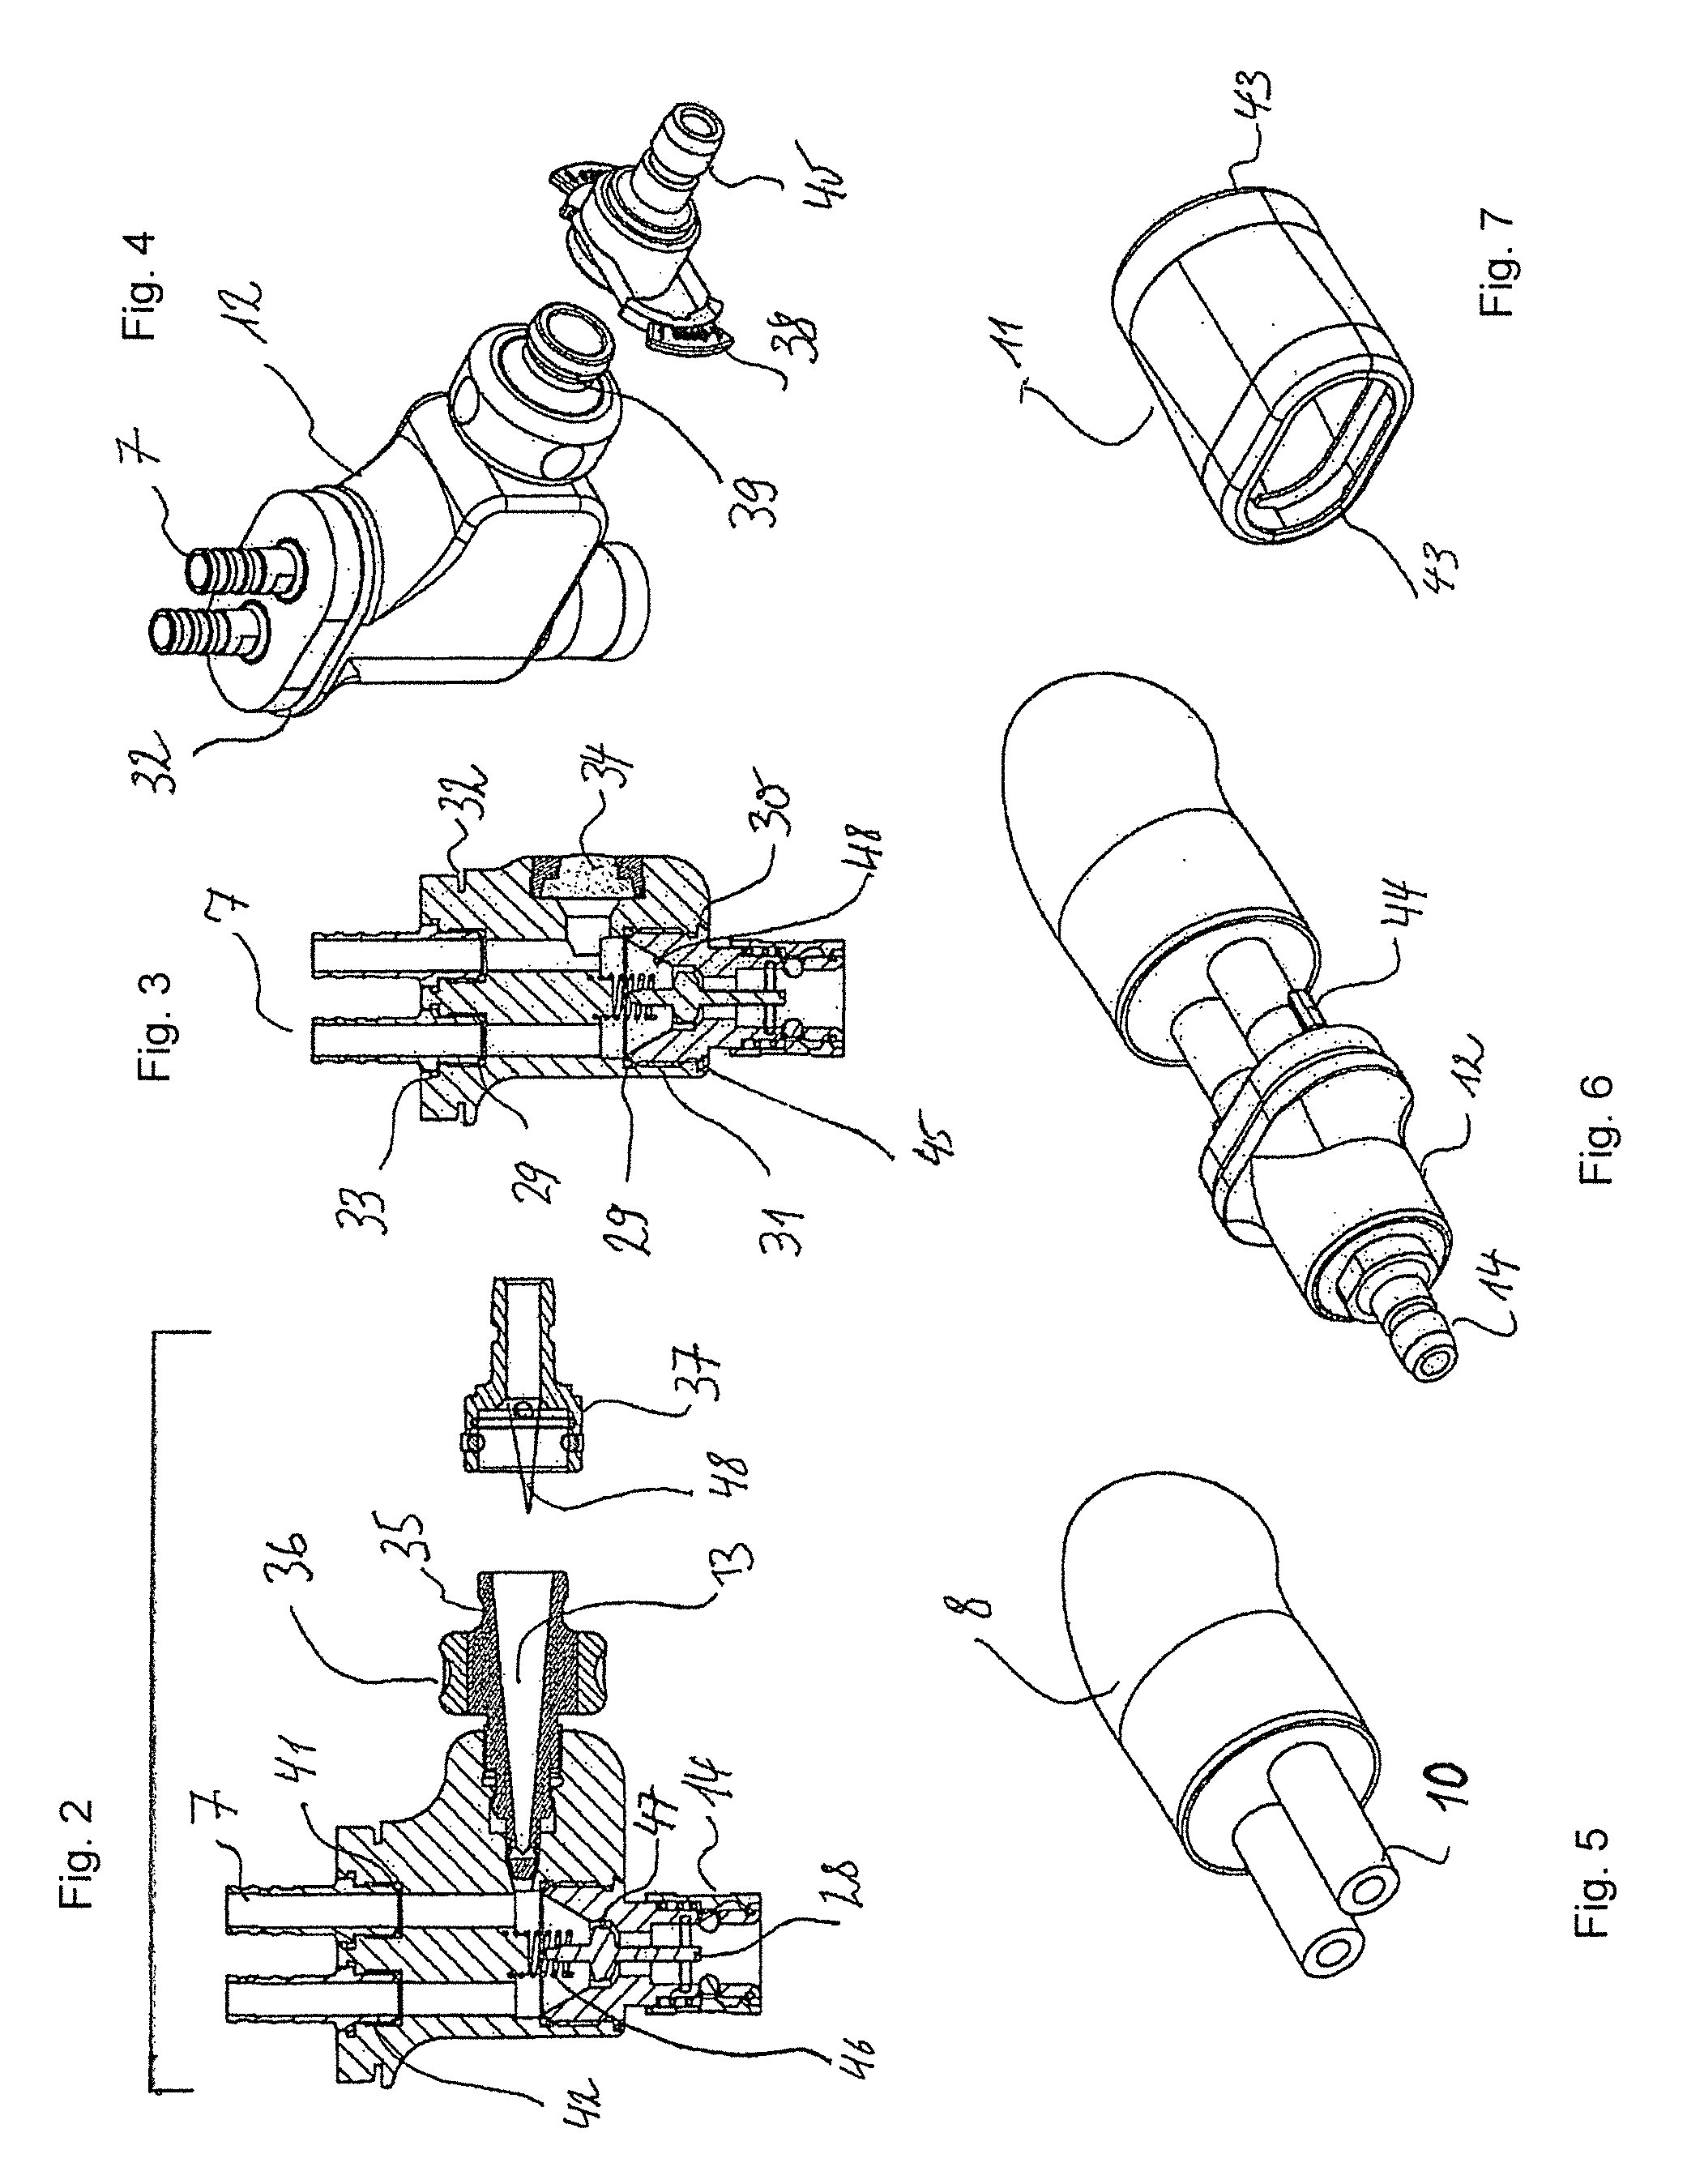 Fluid system for supplying a device with highly pure liquid